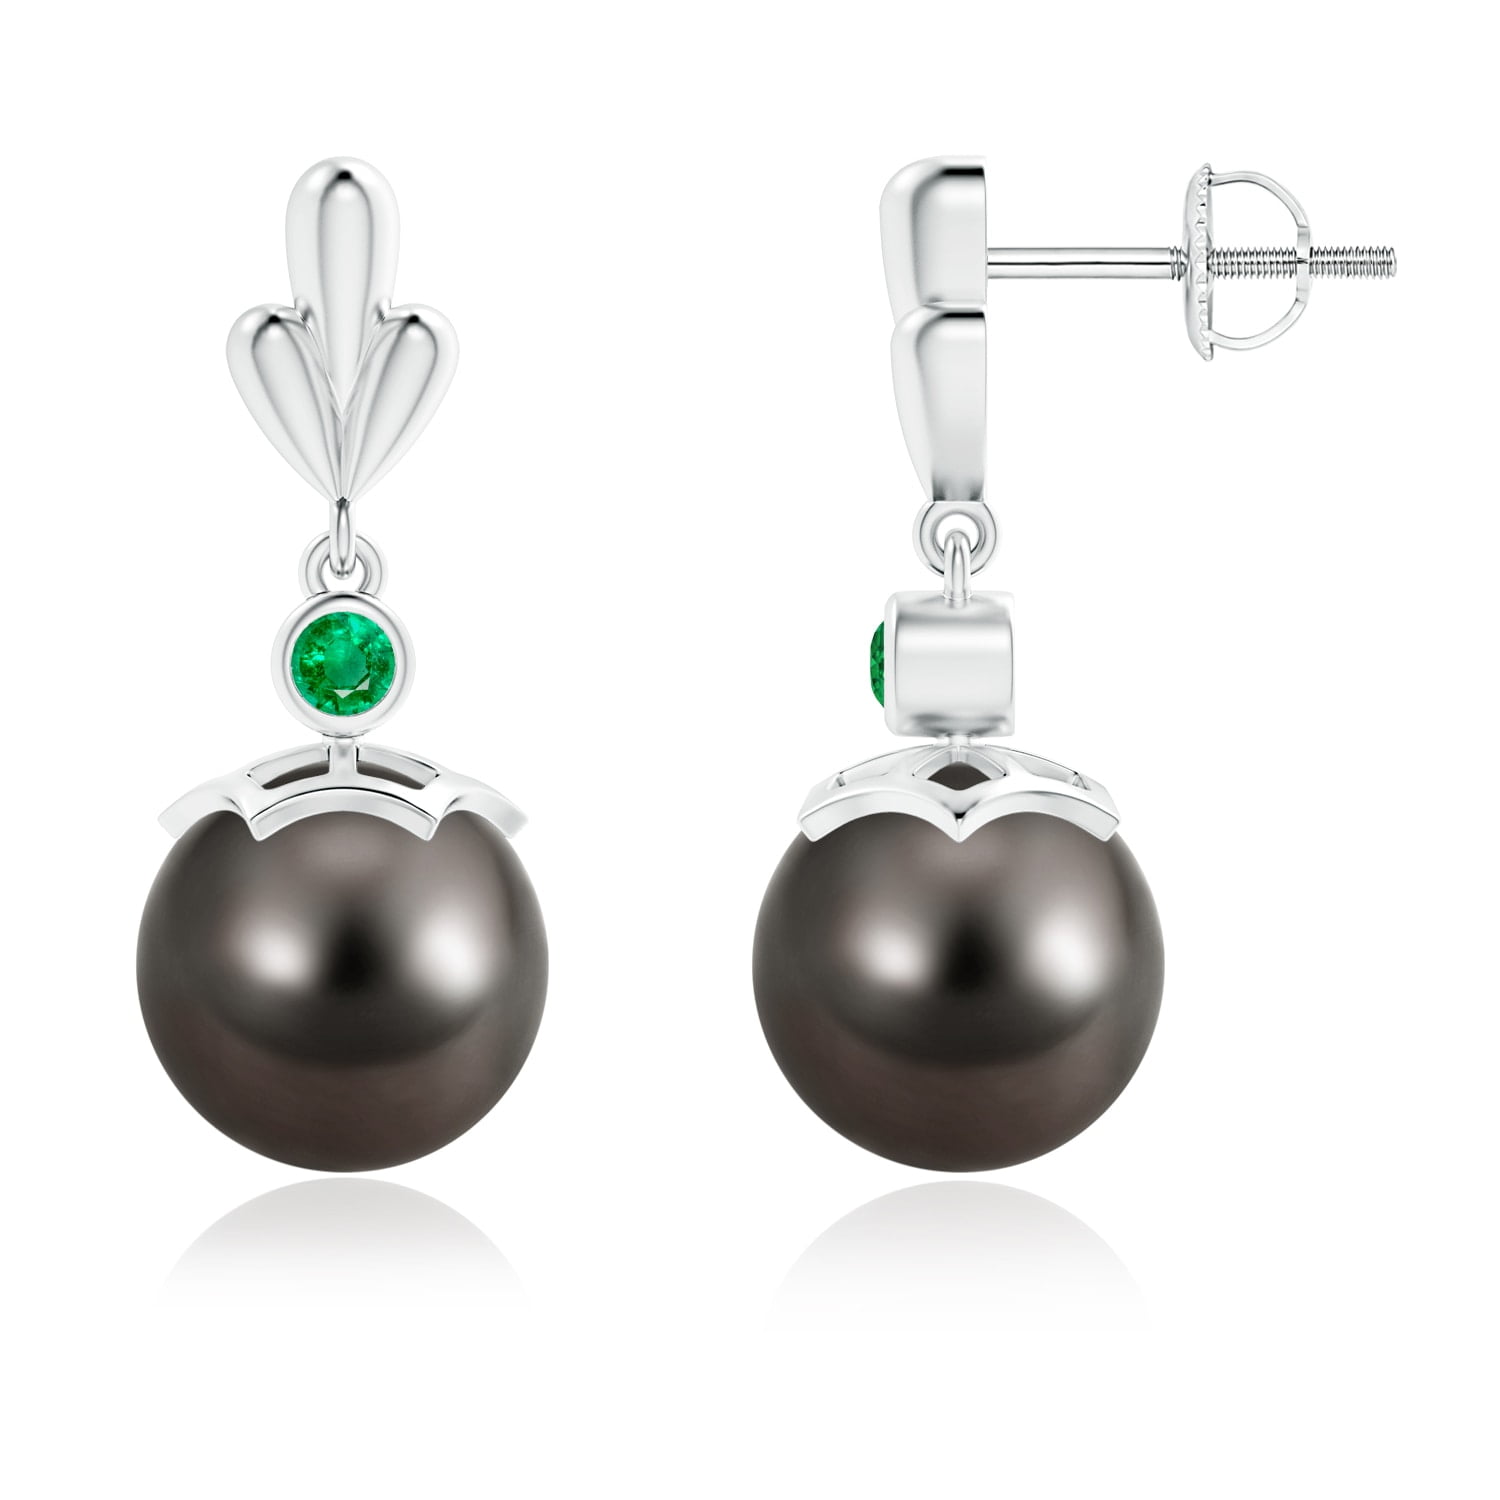 Iridescent Tahitian Look Pearl & Sterling Silver Drop Earrings with Gift Box 